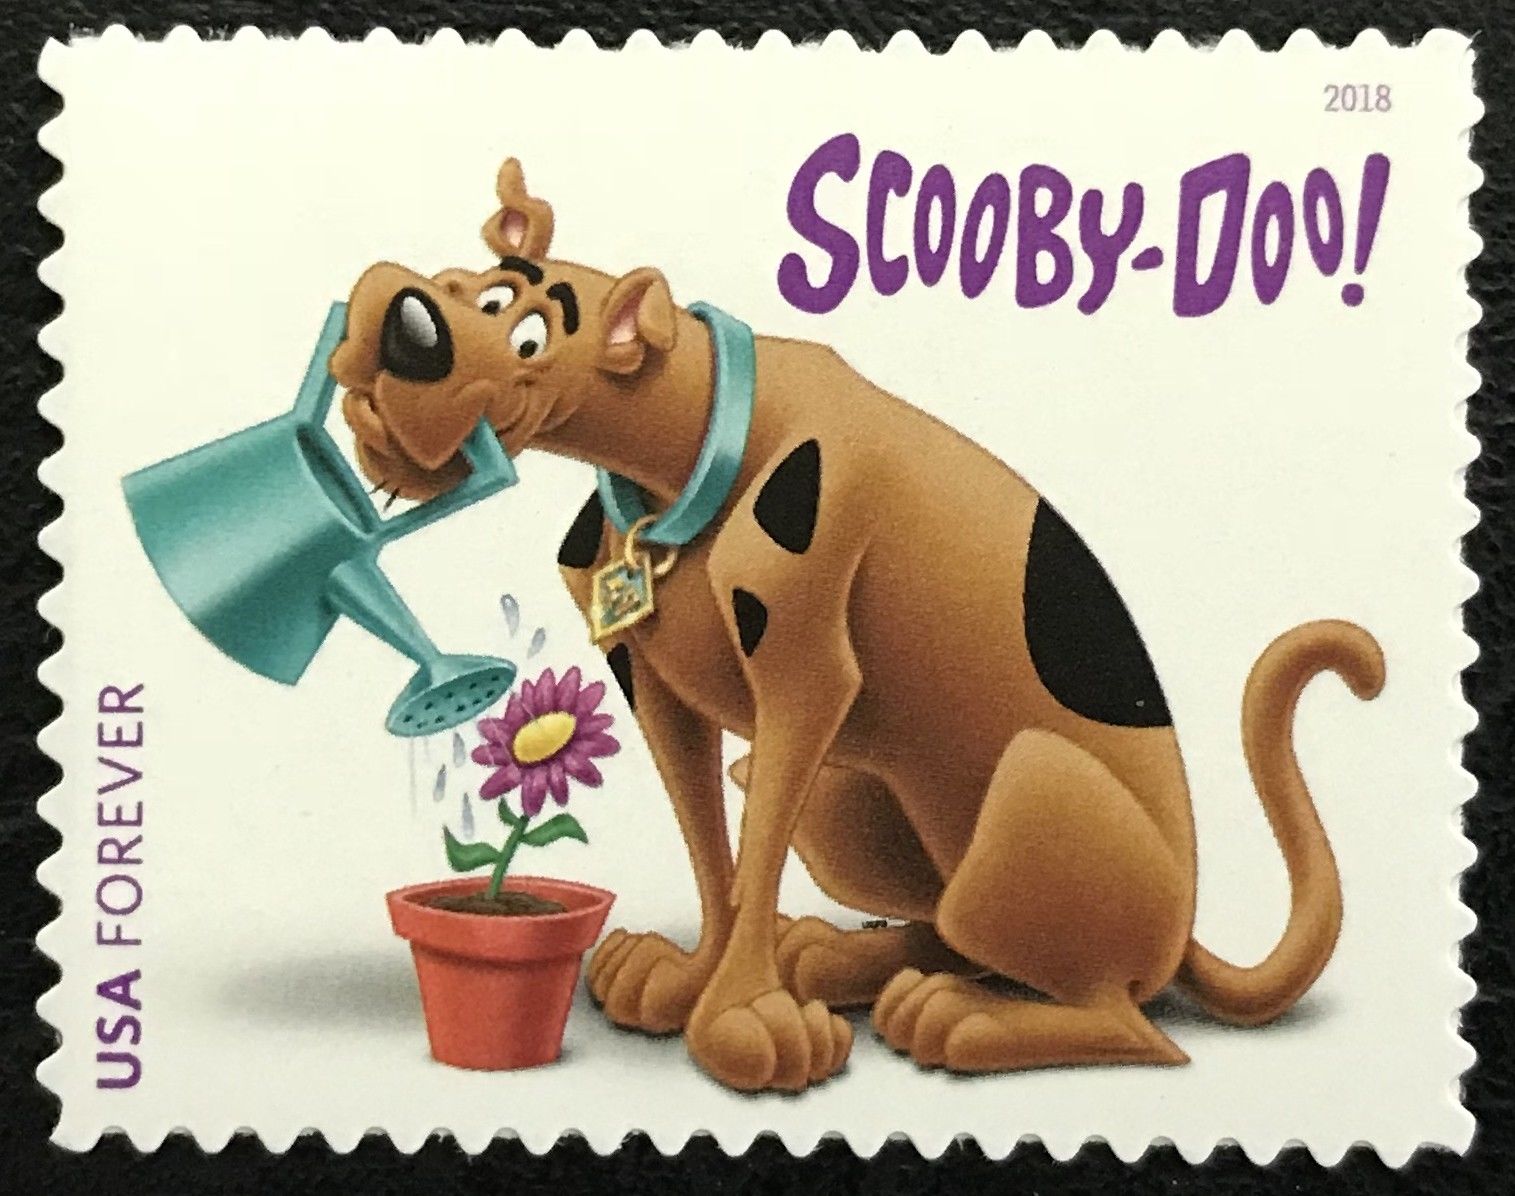 5299 Forever Scooby Doo Used  Single #5299used